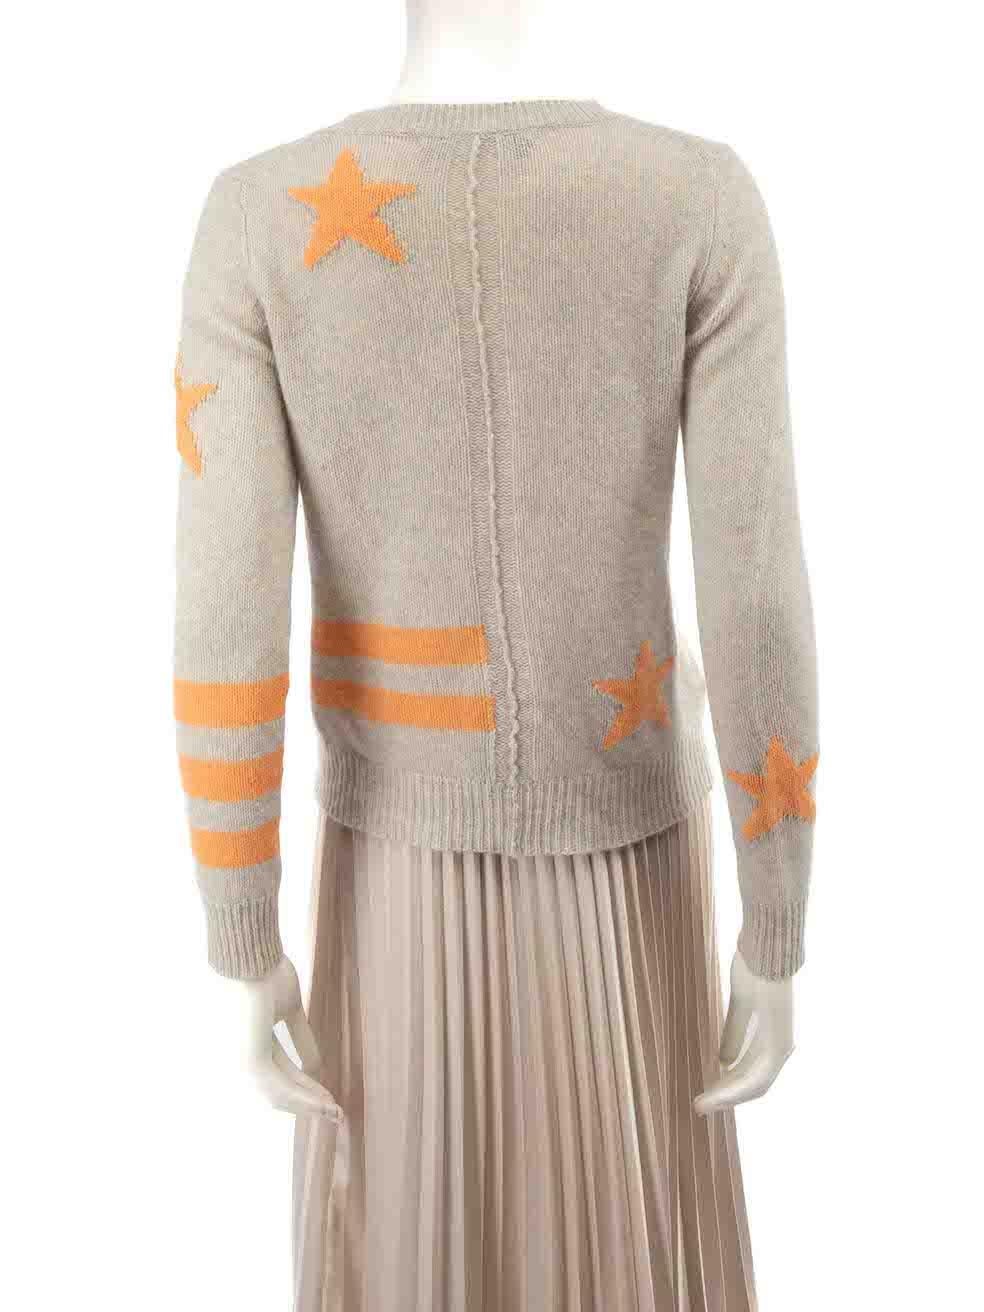 360 Cashmere Grey Cashmere Star Pattern Jumper Size S In Excellent Condition For Sale In London, GB